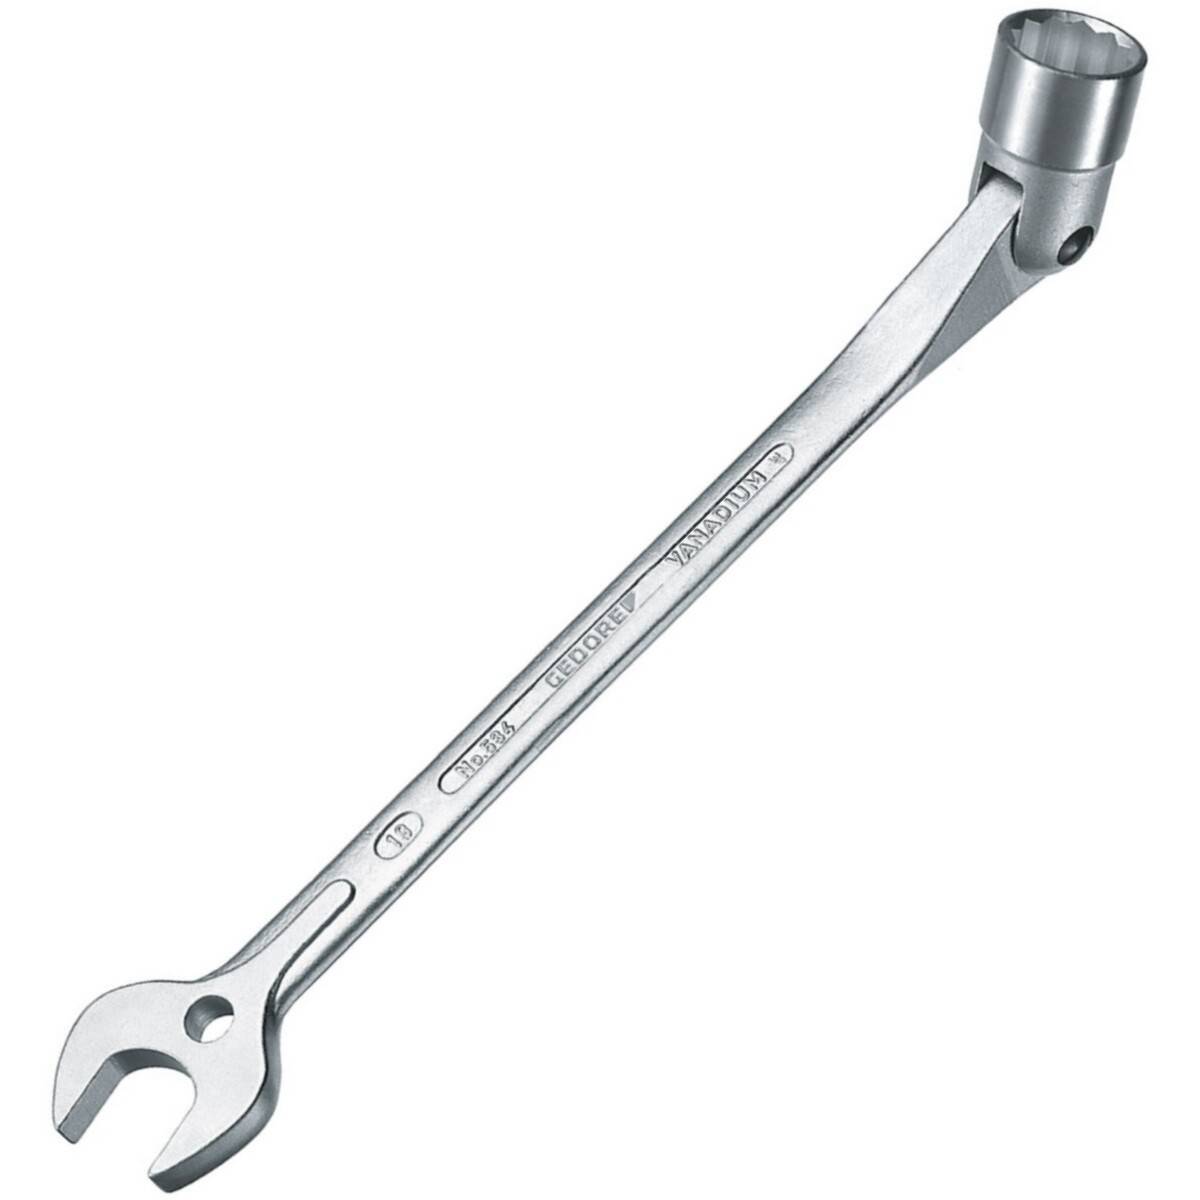 Gedore 6512300 13mm Combination Swivel Head Wrench 534 13 from